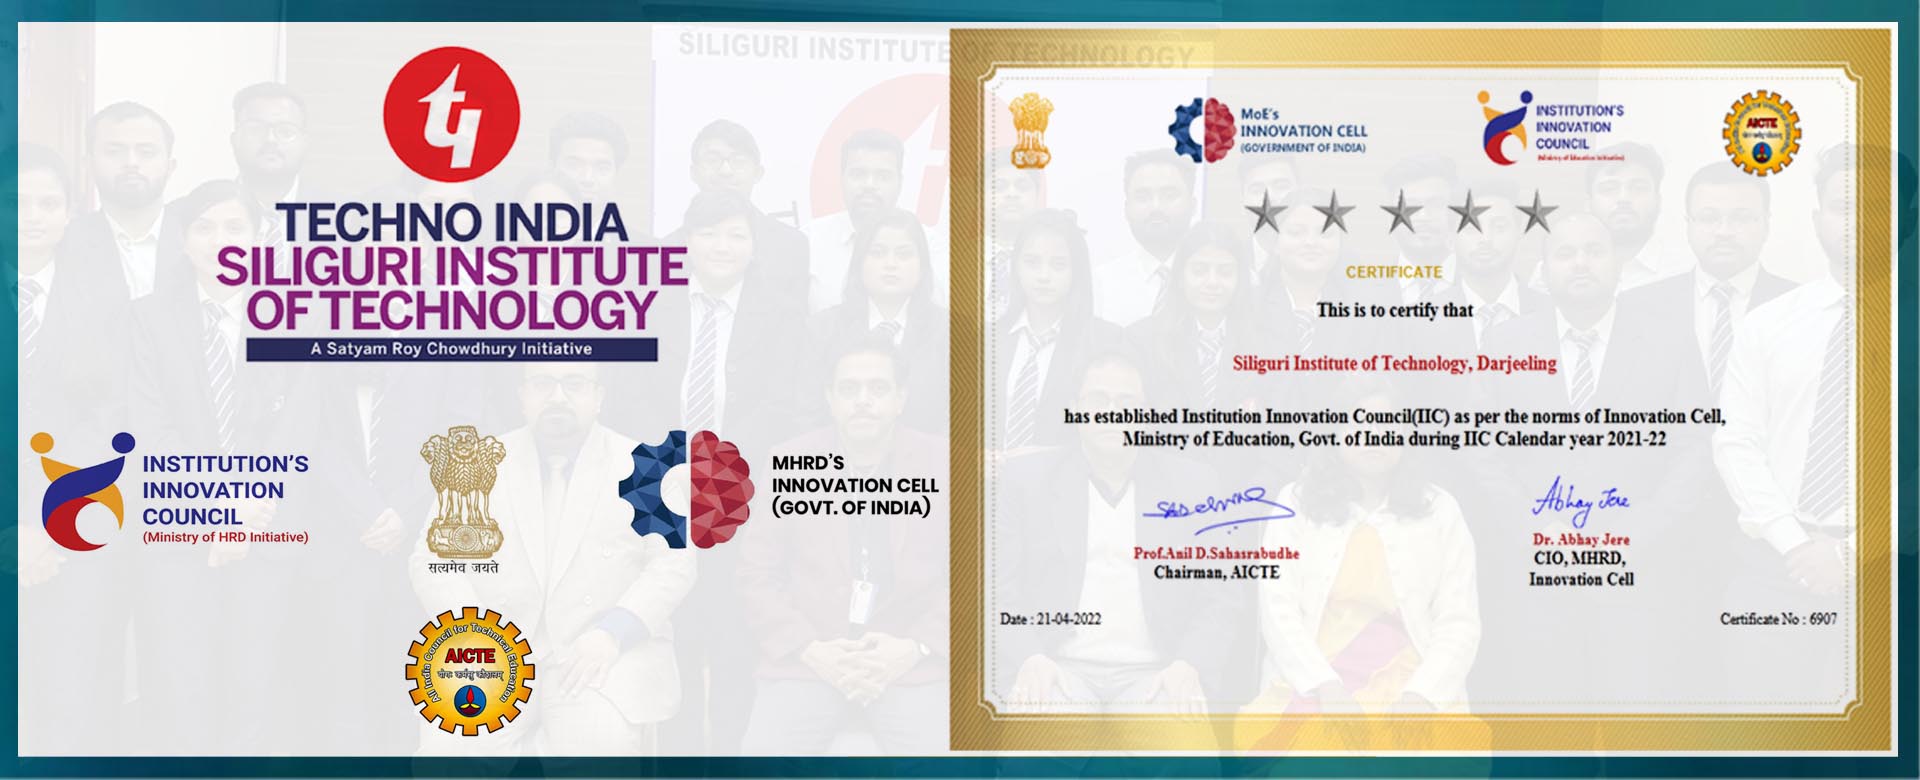 Institution Innovation Council (IIC), SIT